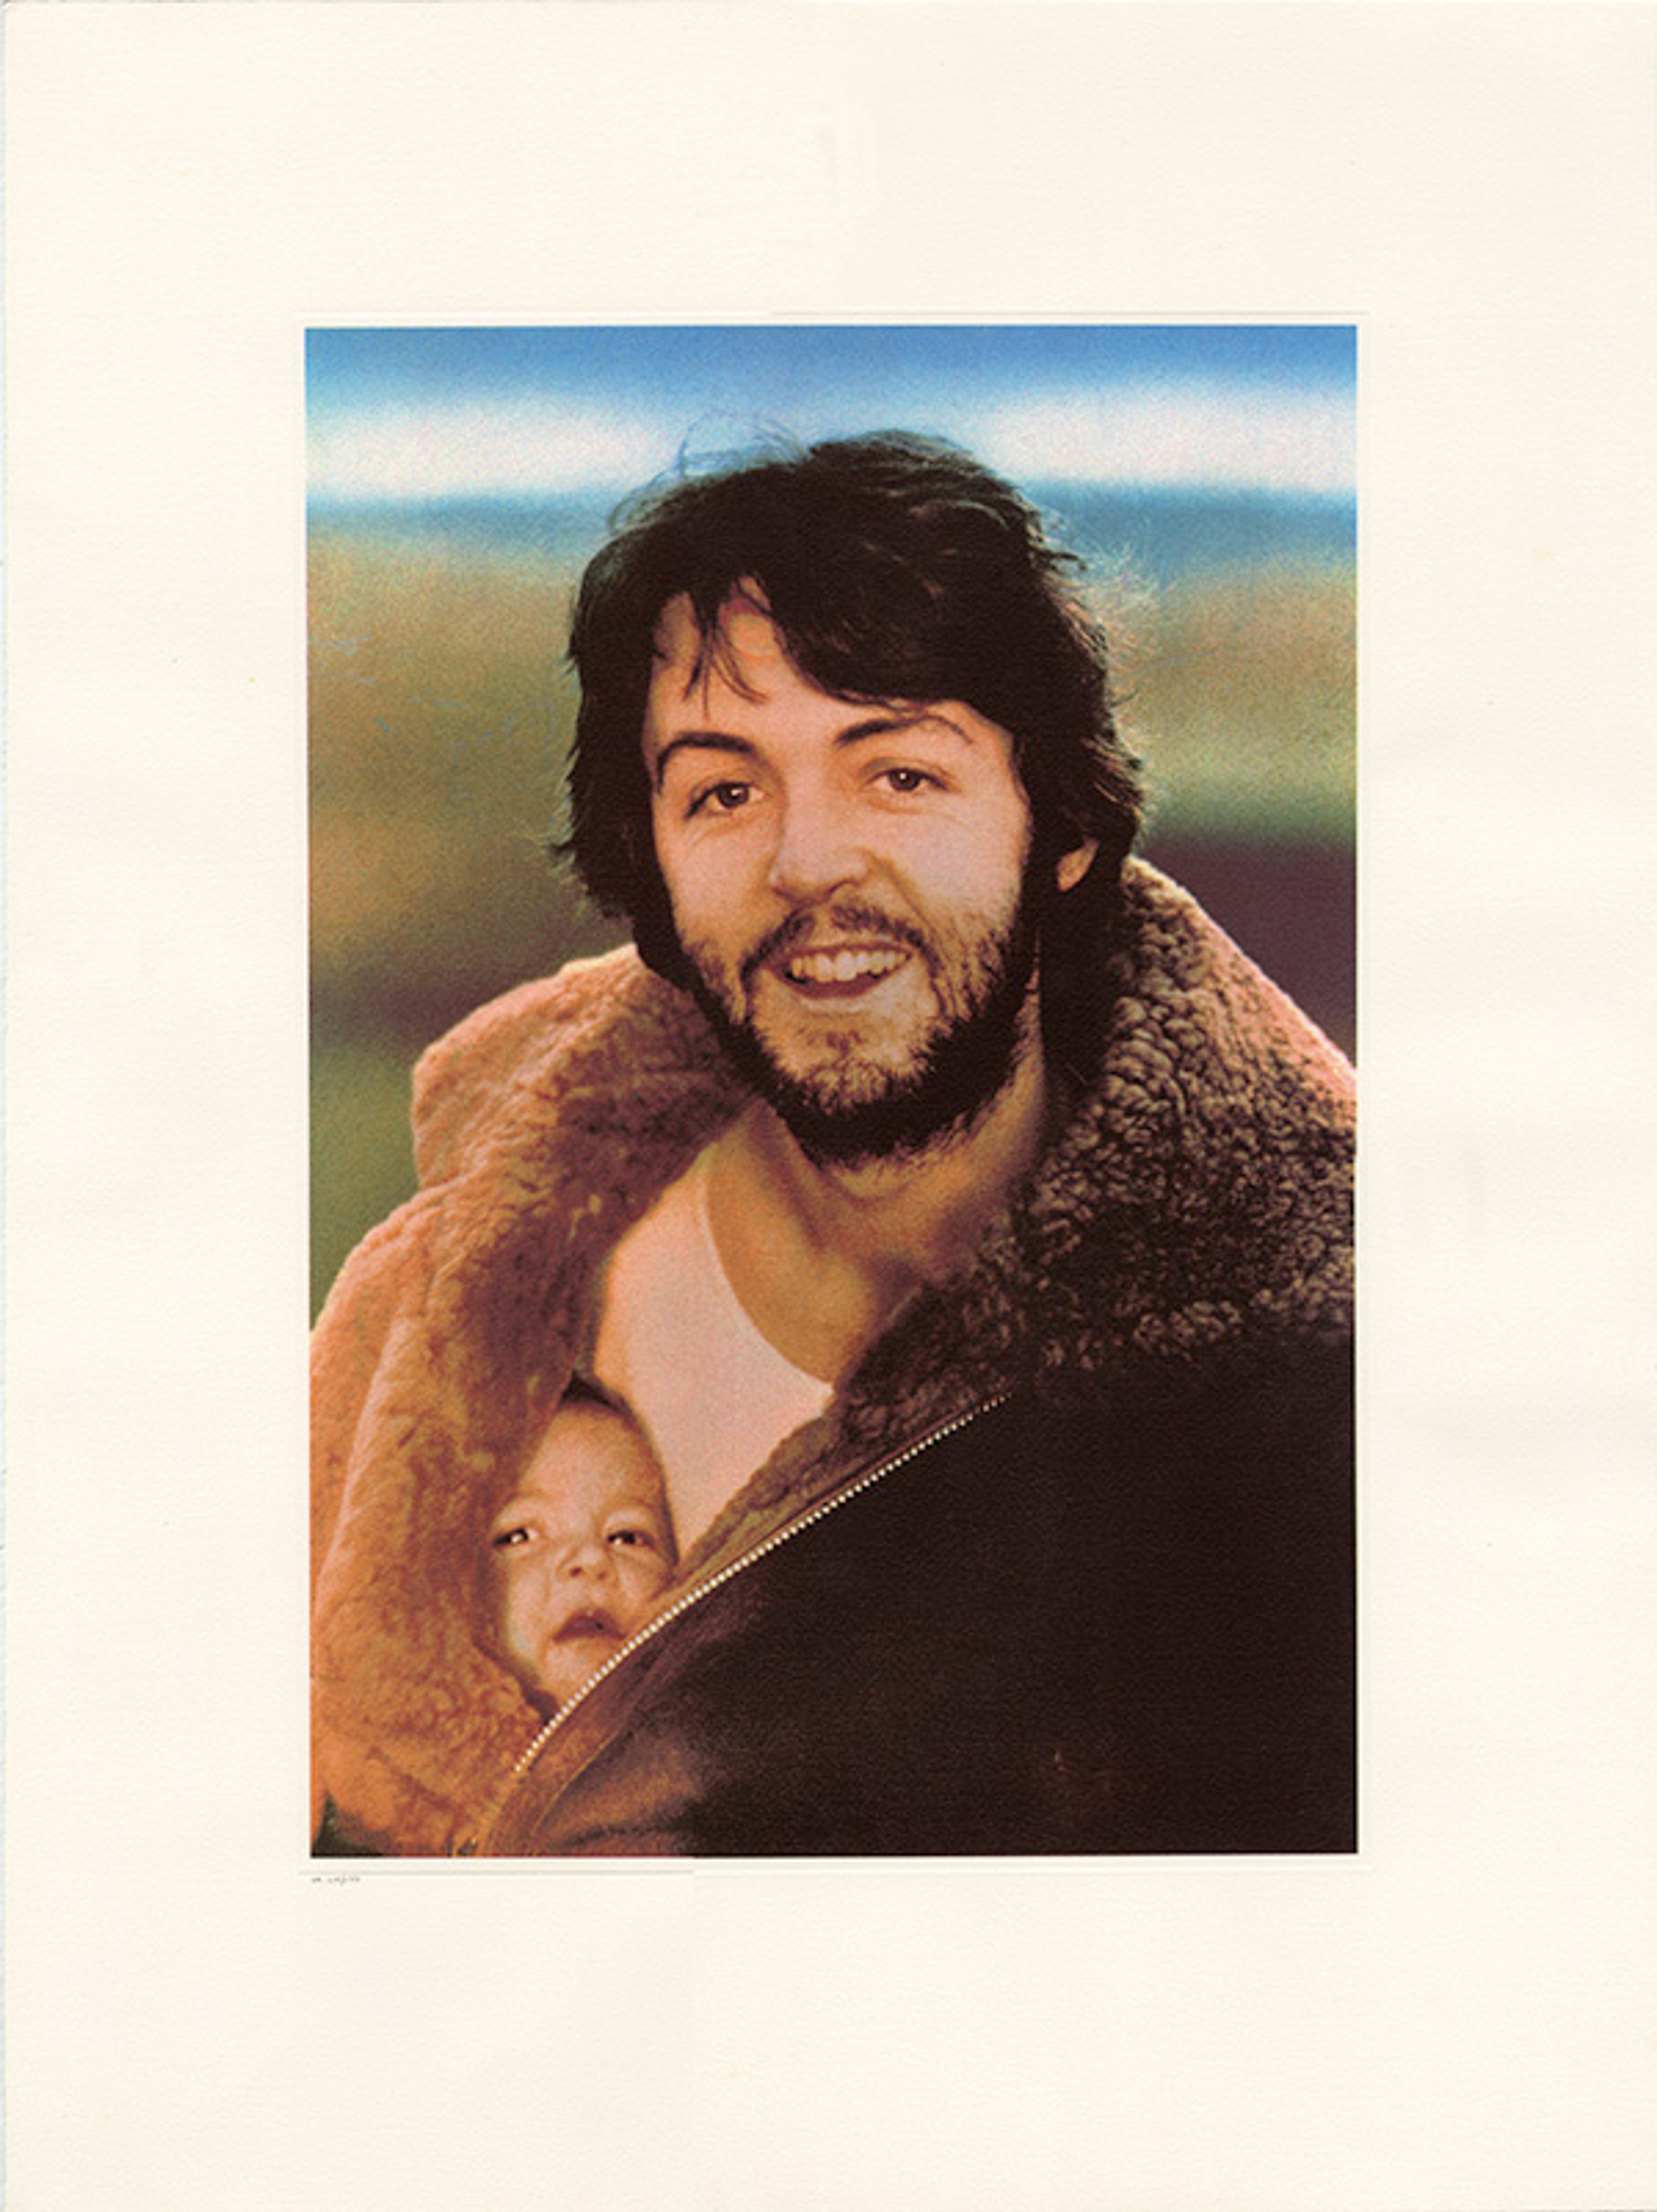 Photo of Paul and Mary taken by Linda McCartney